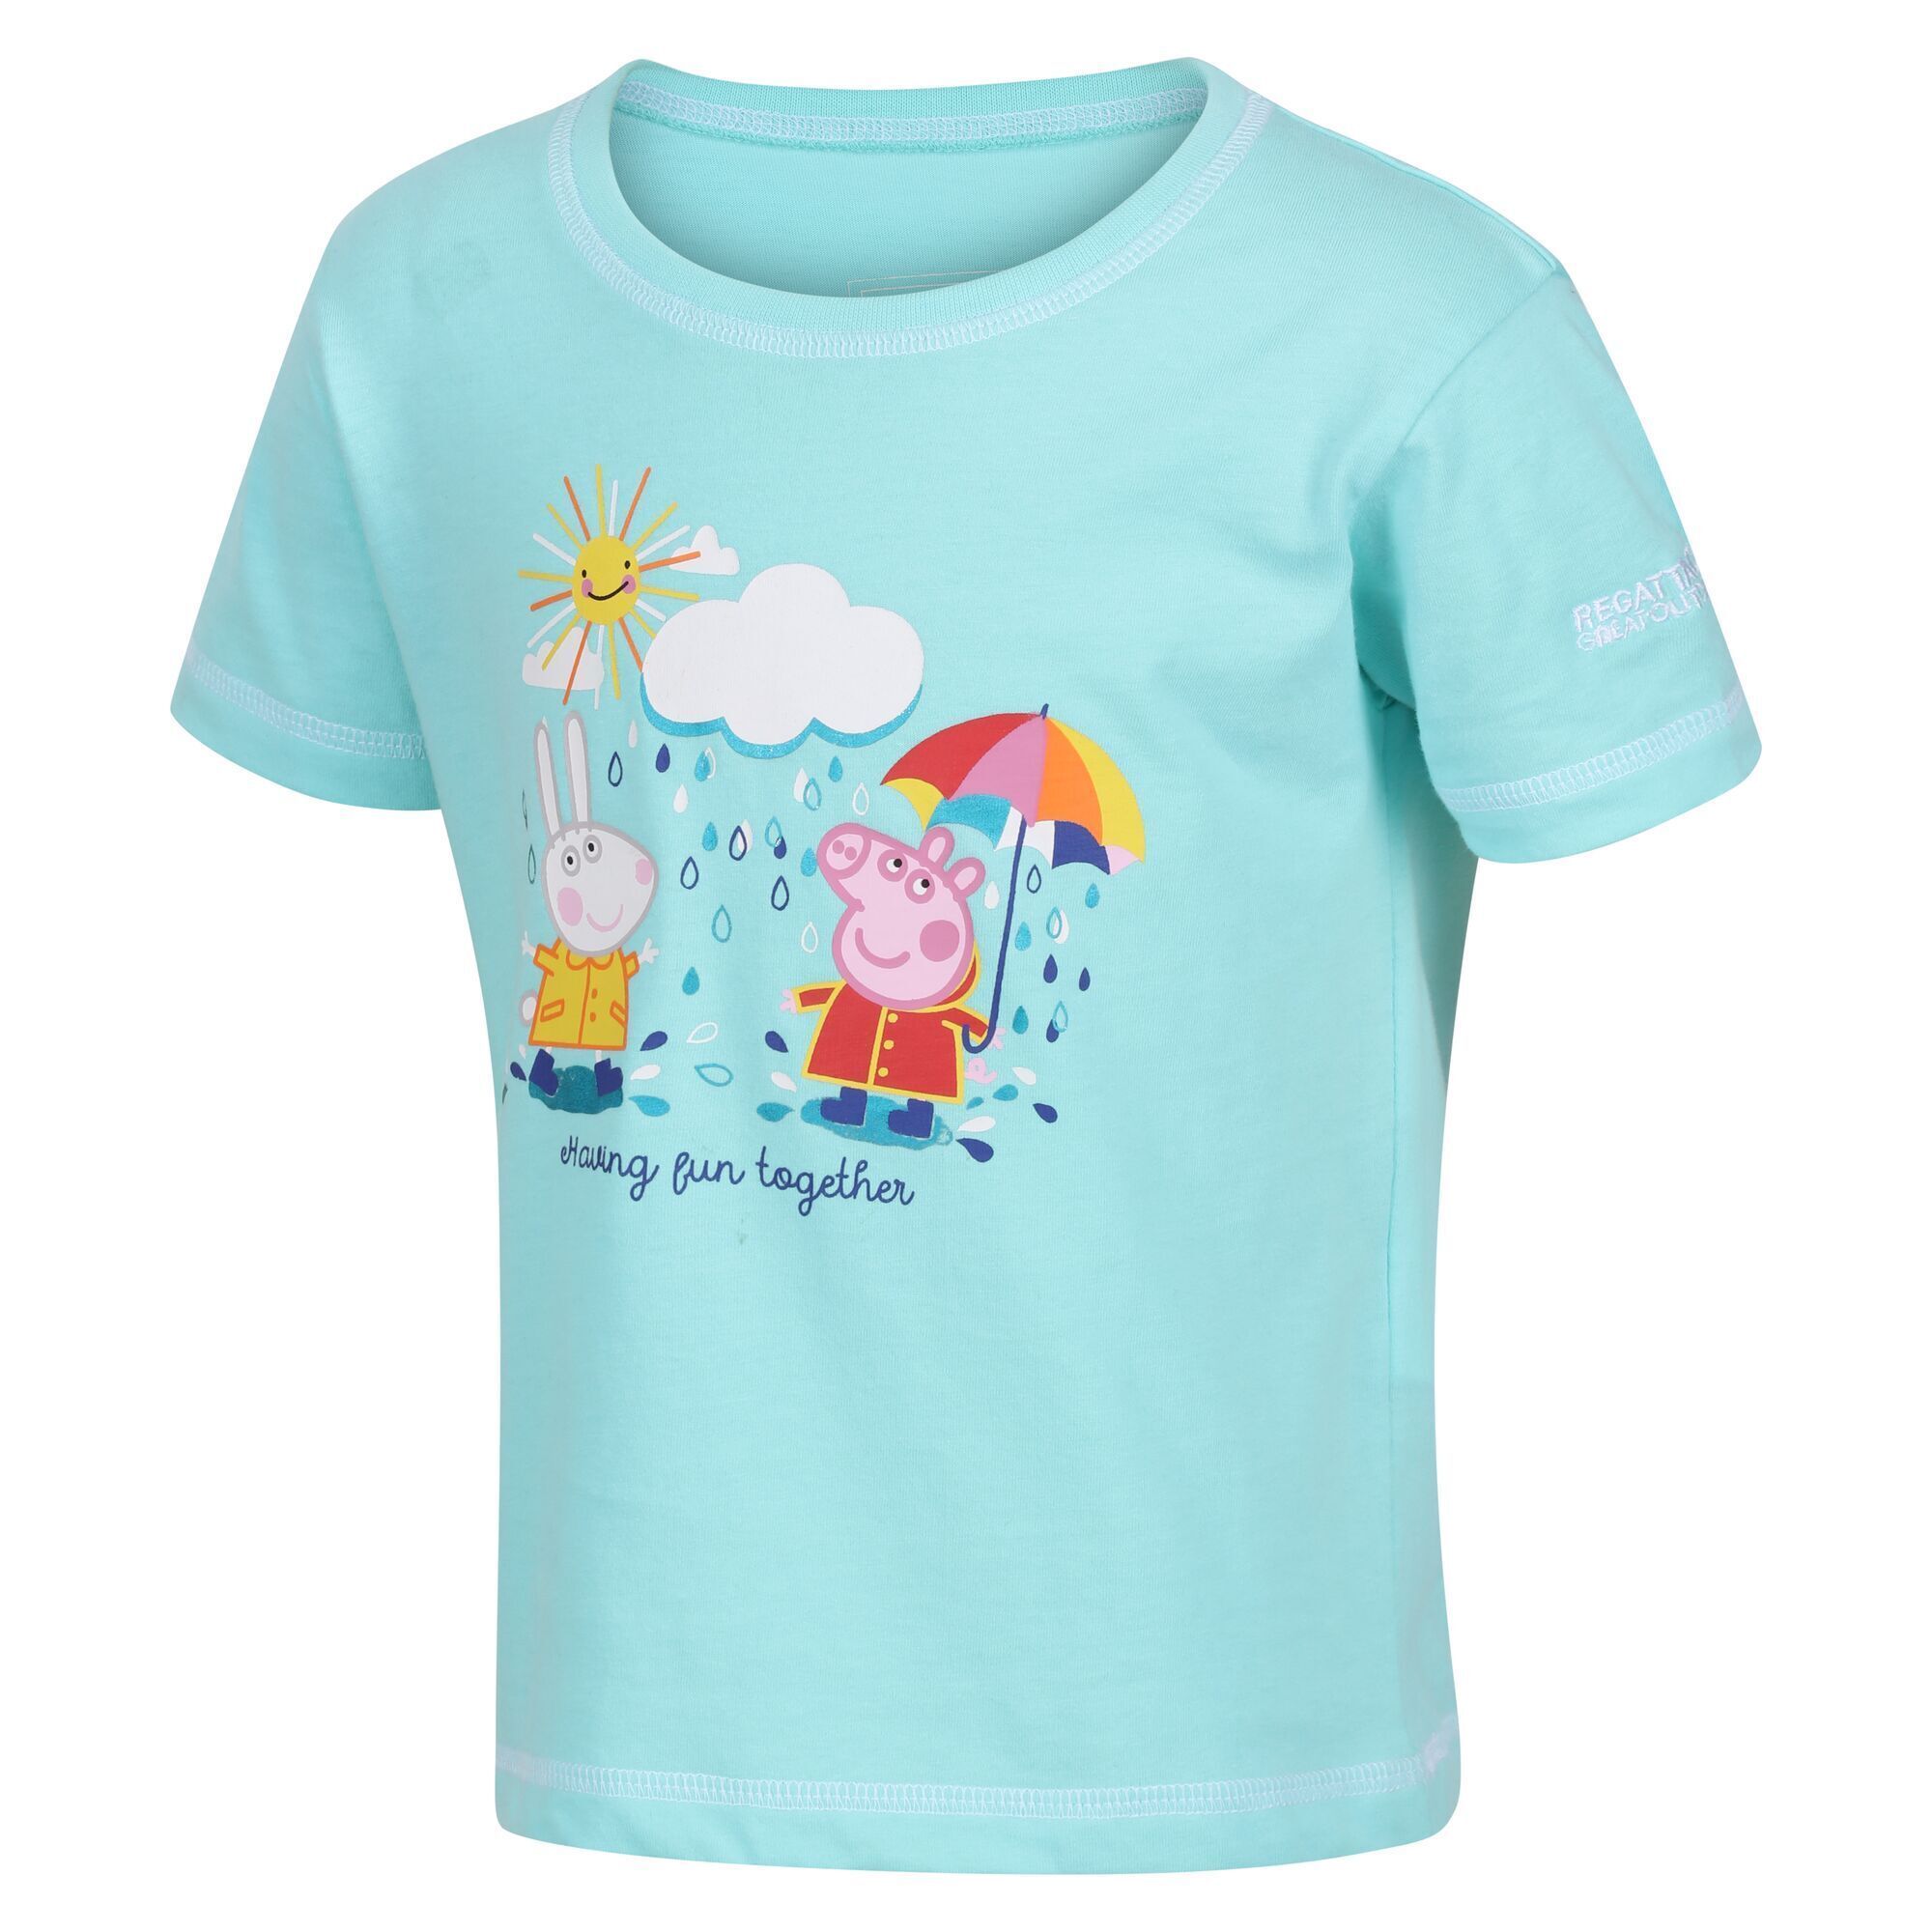 Material: Cotton, Polyester. Fabric: Coolweave, Jersey. Design: Logo, Printed, Text. Characters: Peppa Pig. Neckline: Round Neck. Sleeve-Type: Short-Sleeved. Fabric Technology: Breathable, Lightweight. 100% Officially Licensed. 160gsm.